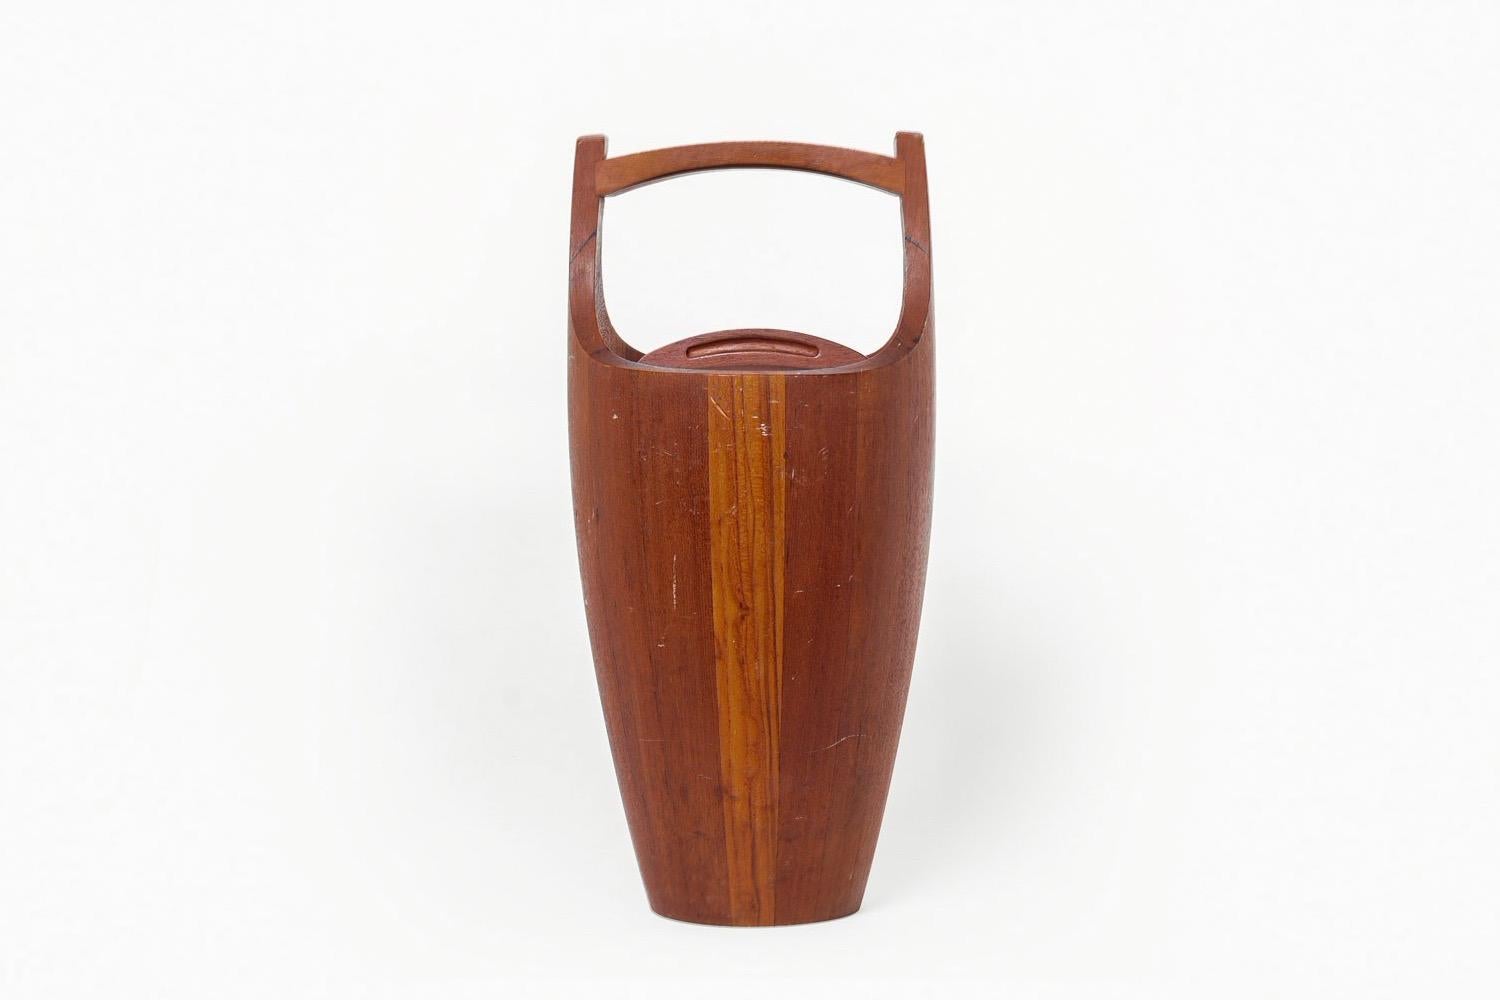 This vintage Danish modern teak ice bucket was designed by Jens Quistgaard for Dansk circa 1950. This earlier model was made in Denmark. The iconic design has a simple and elegant shape featuring a top handle and round removable lid and is made of